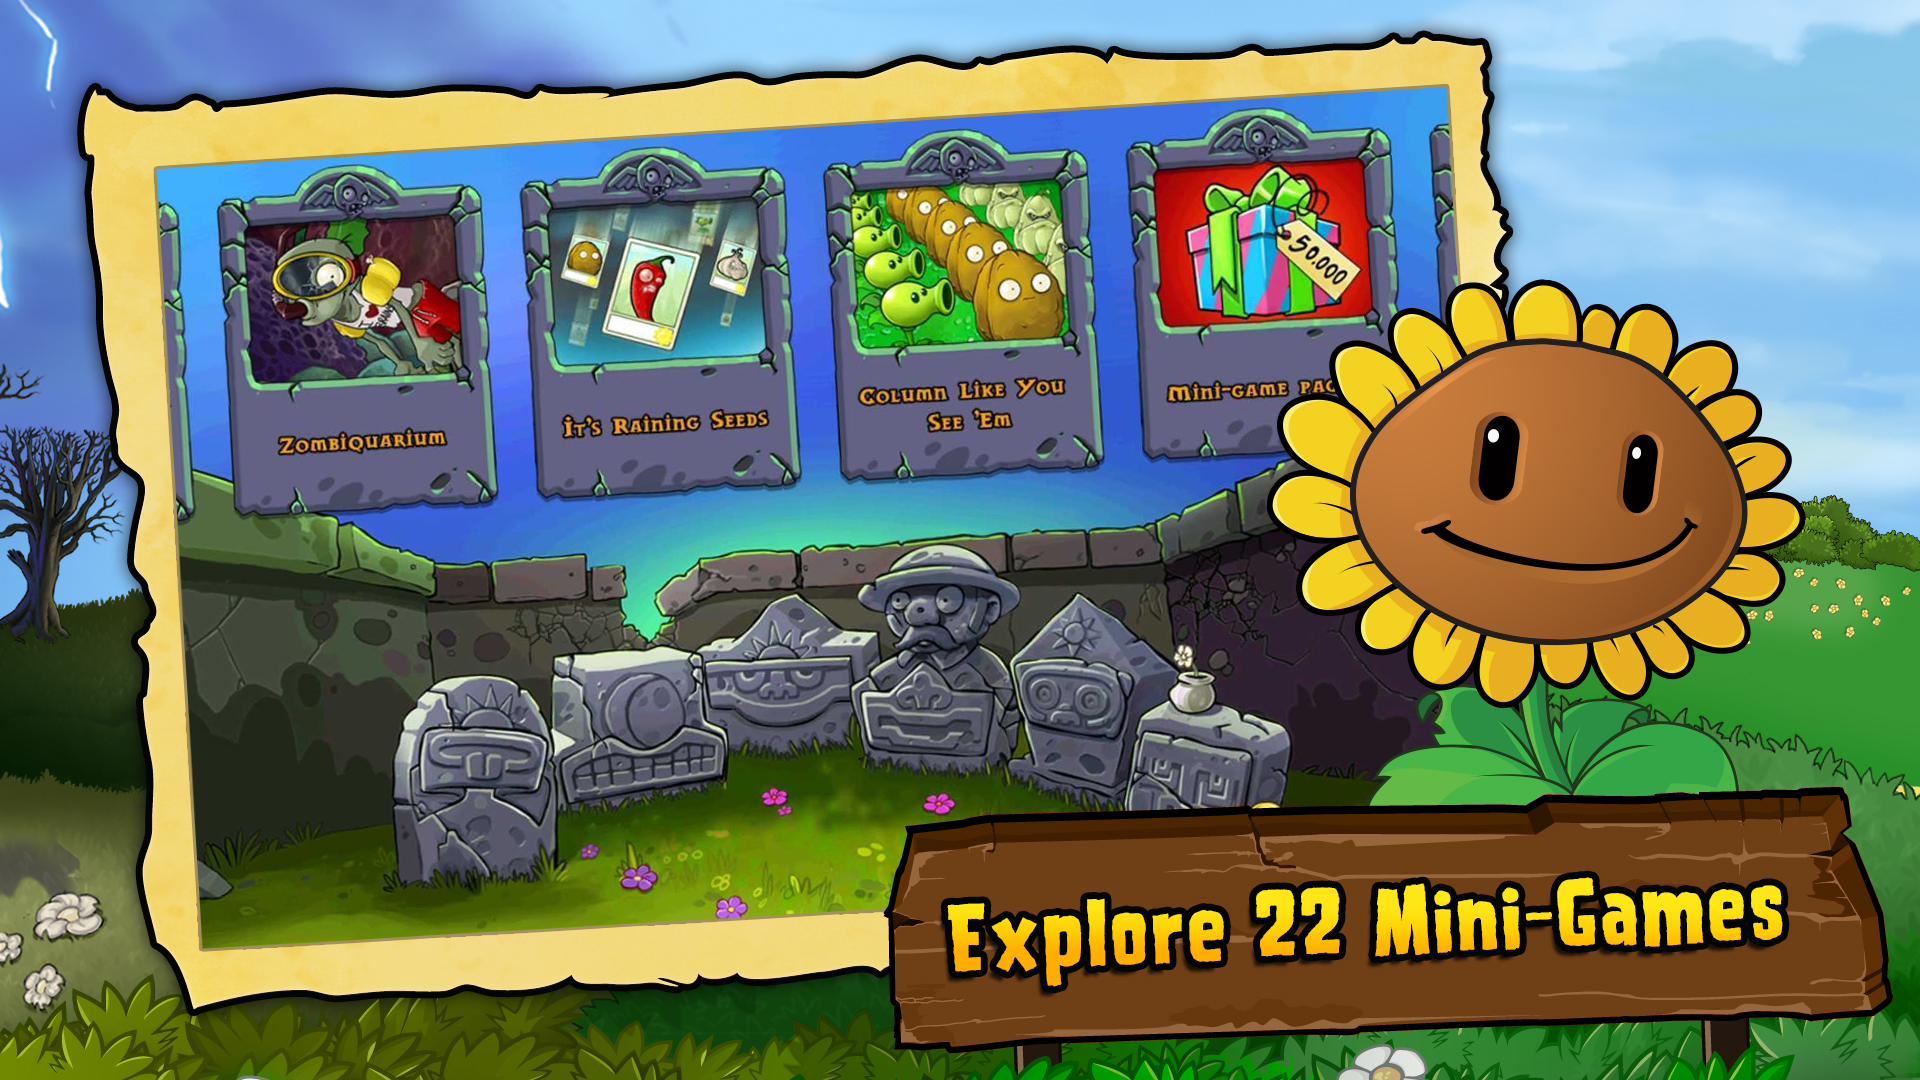 Download Plants vs Zombies for PC / Plants vs Zombies on PC - Andy -  Android Emulator for PC & Mac